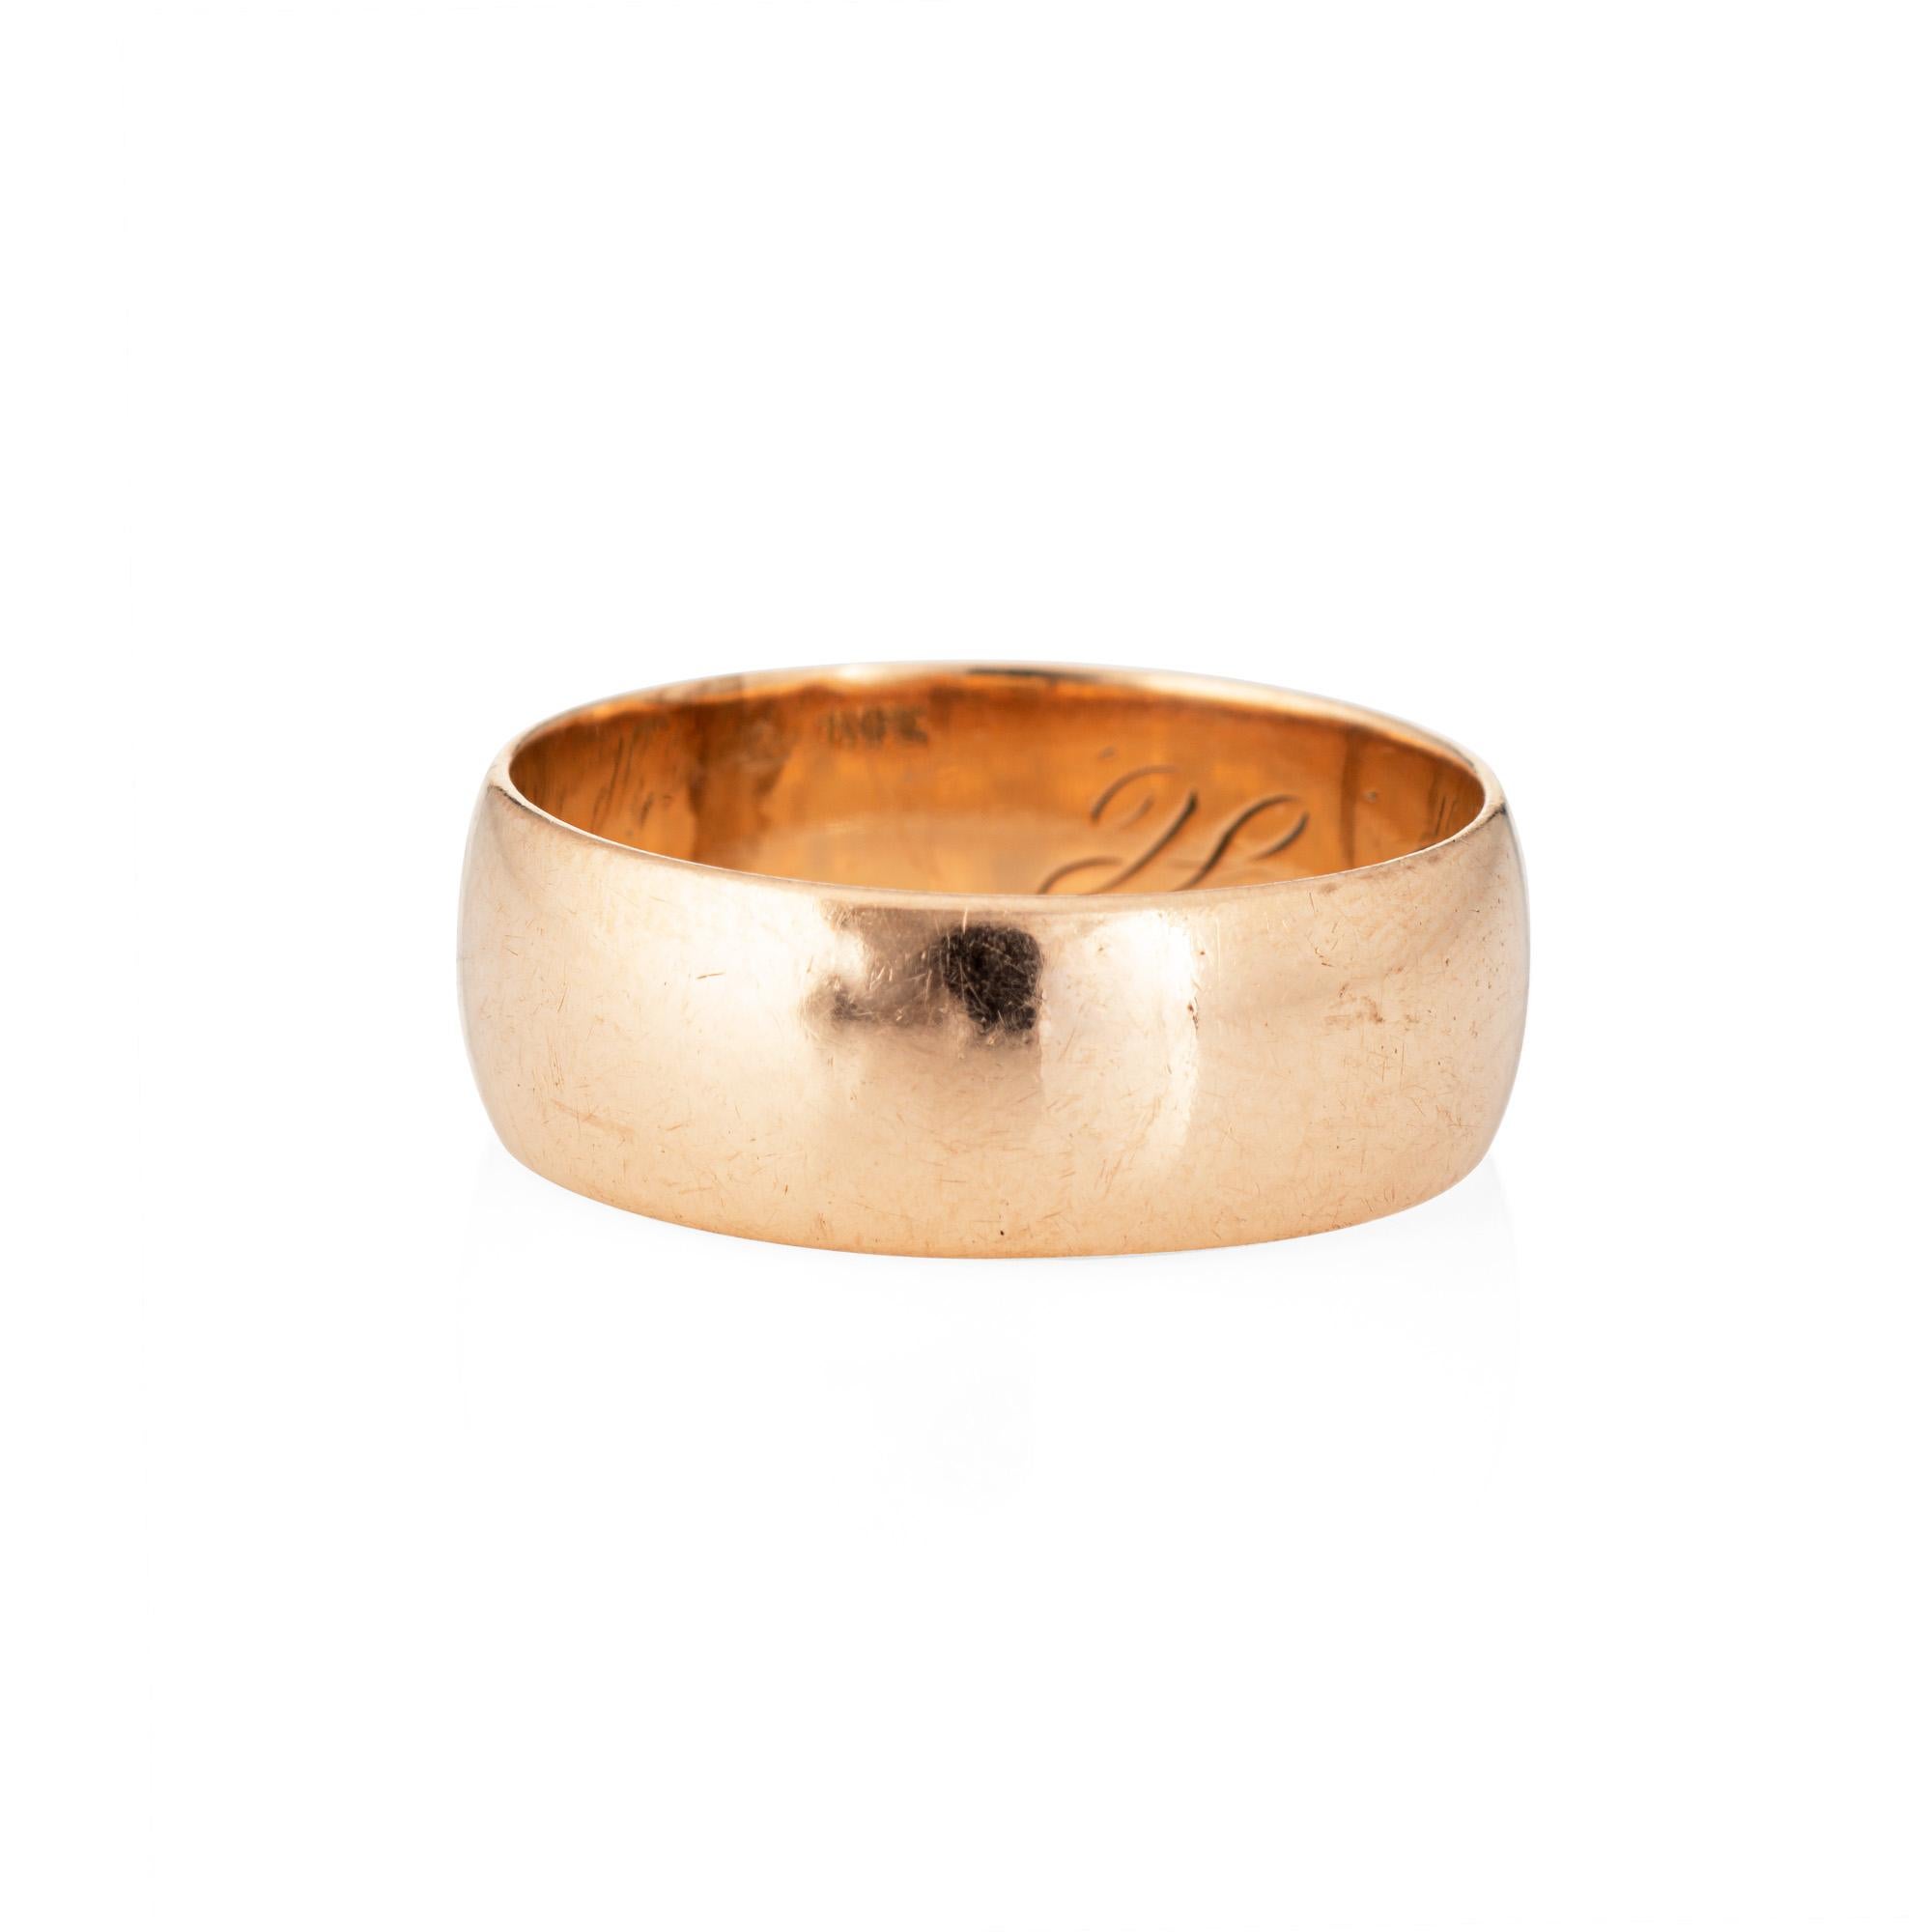 Stylish antique Victorian wedding band (circa 1880s to 1900s), crafted in 18 karat rose gold. 

The sweet ring measures 7mm wide (0.27 inches) with the inner band inscribed 